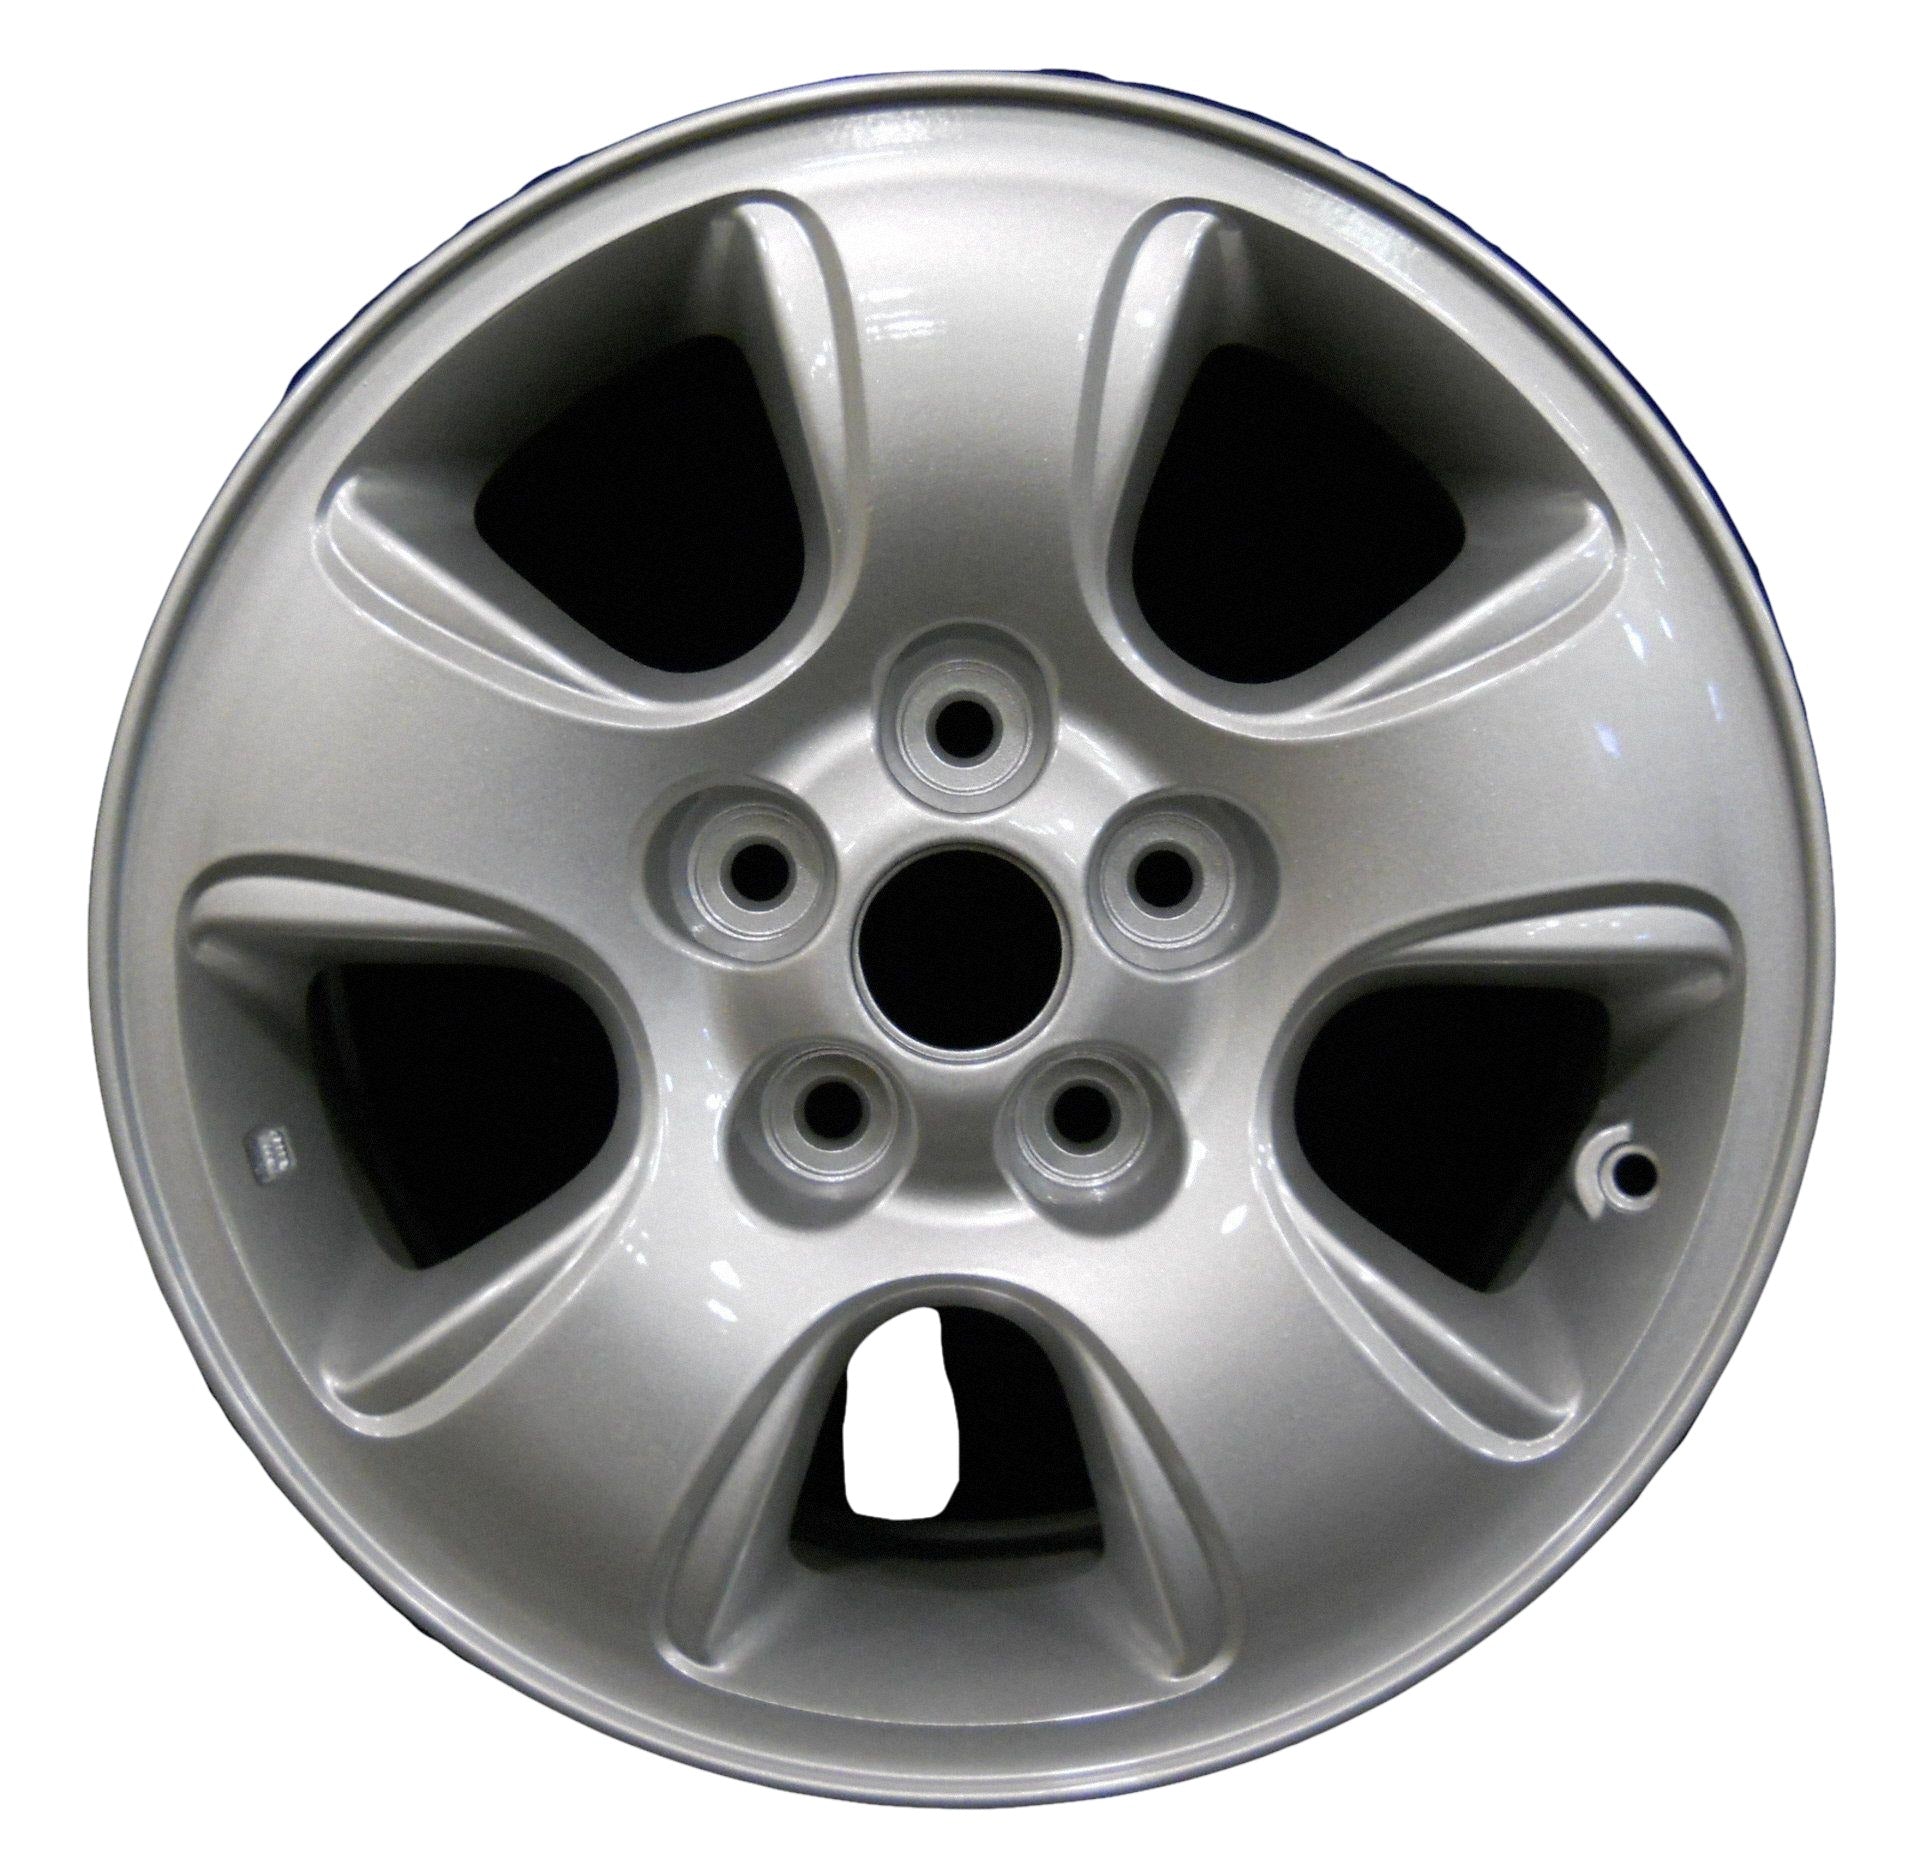 Mazda Tribute  2001, 2002, 2003, 2004 Factory OEM Car Wheel Size 16x7 Alloy WAO.64837.PS02.FF